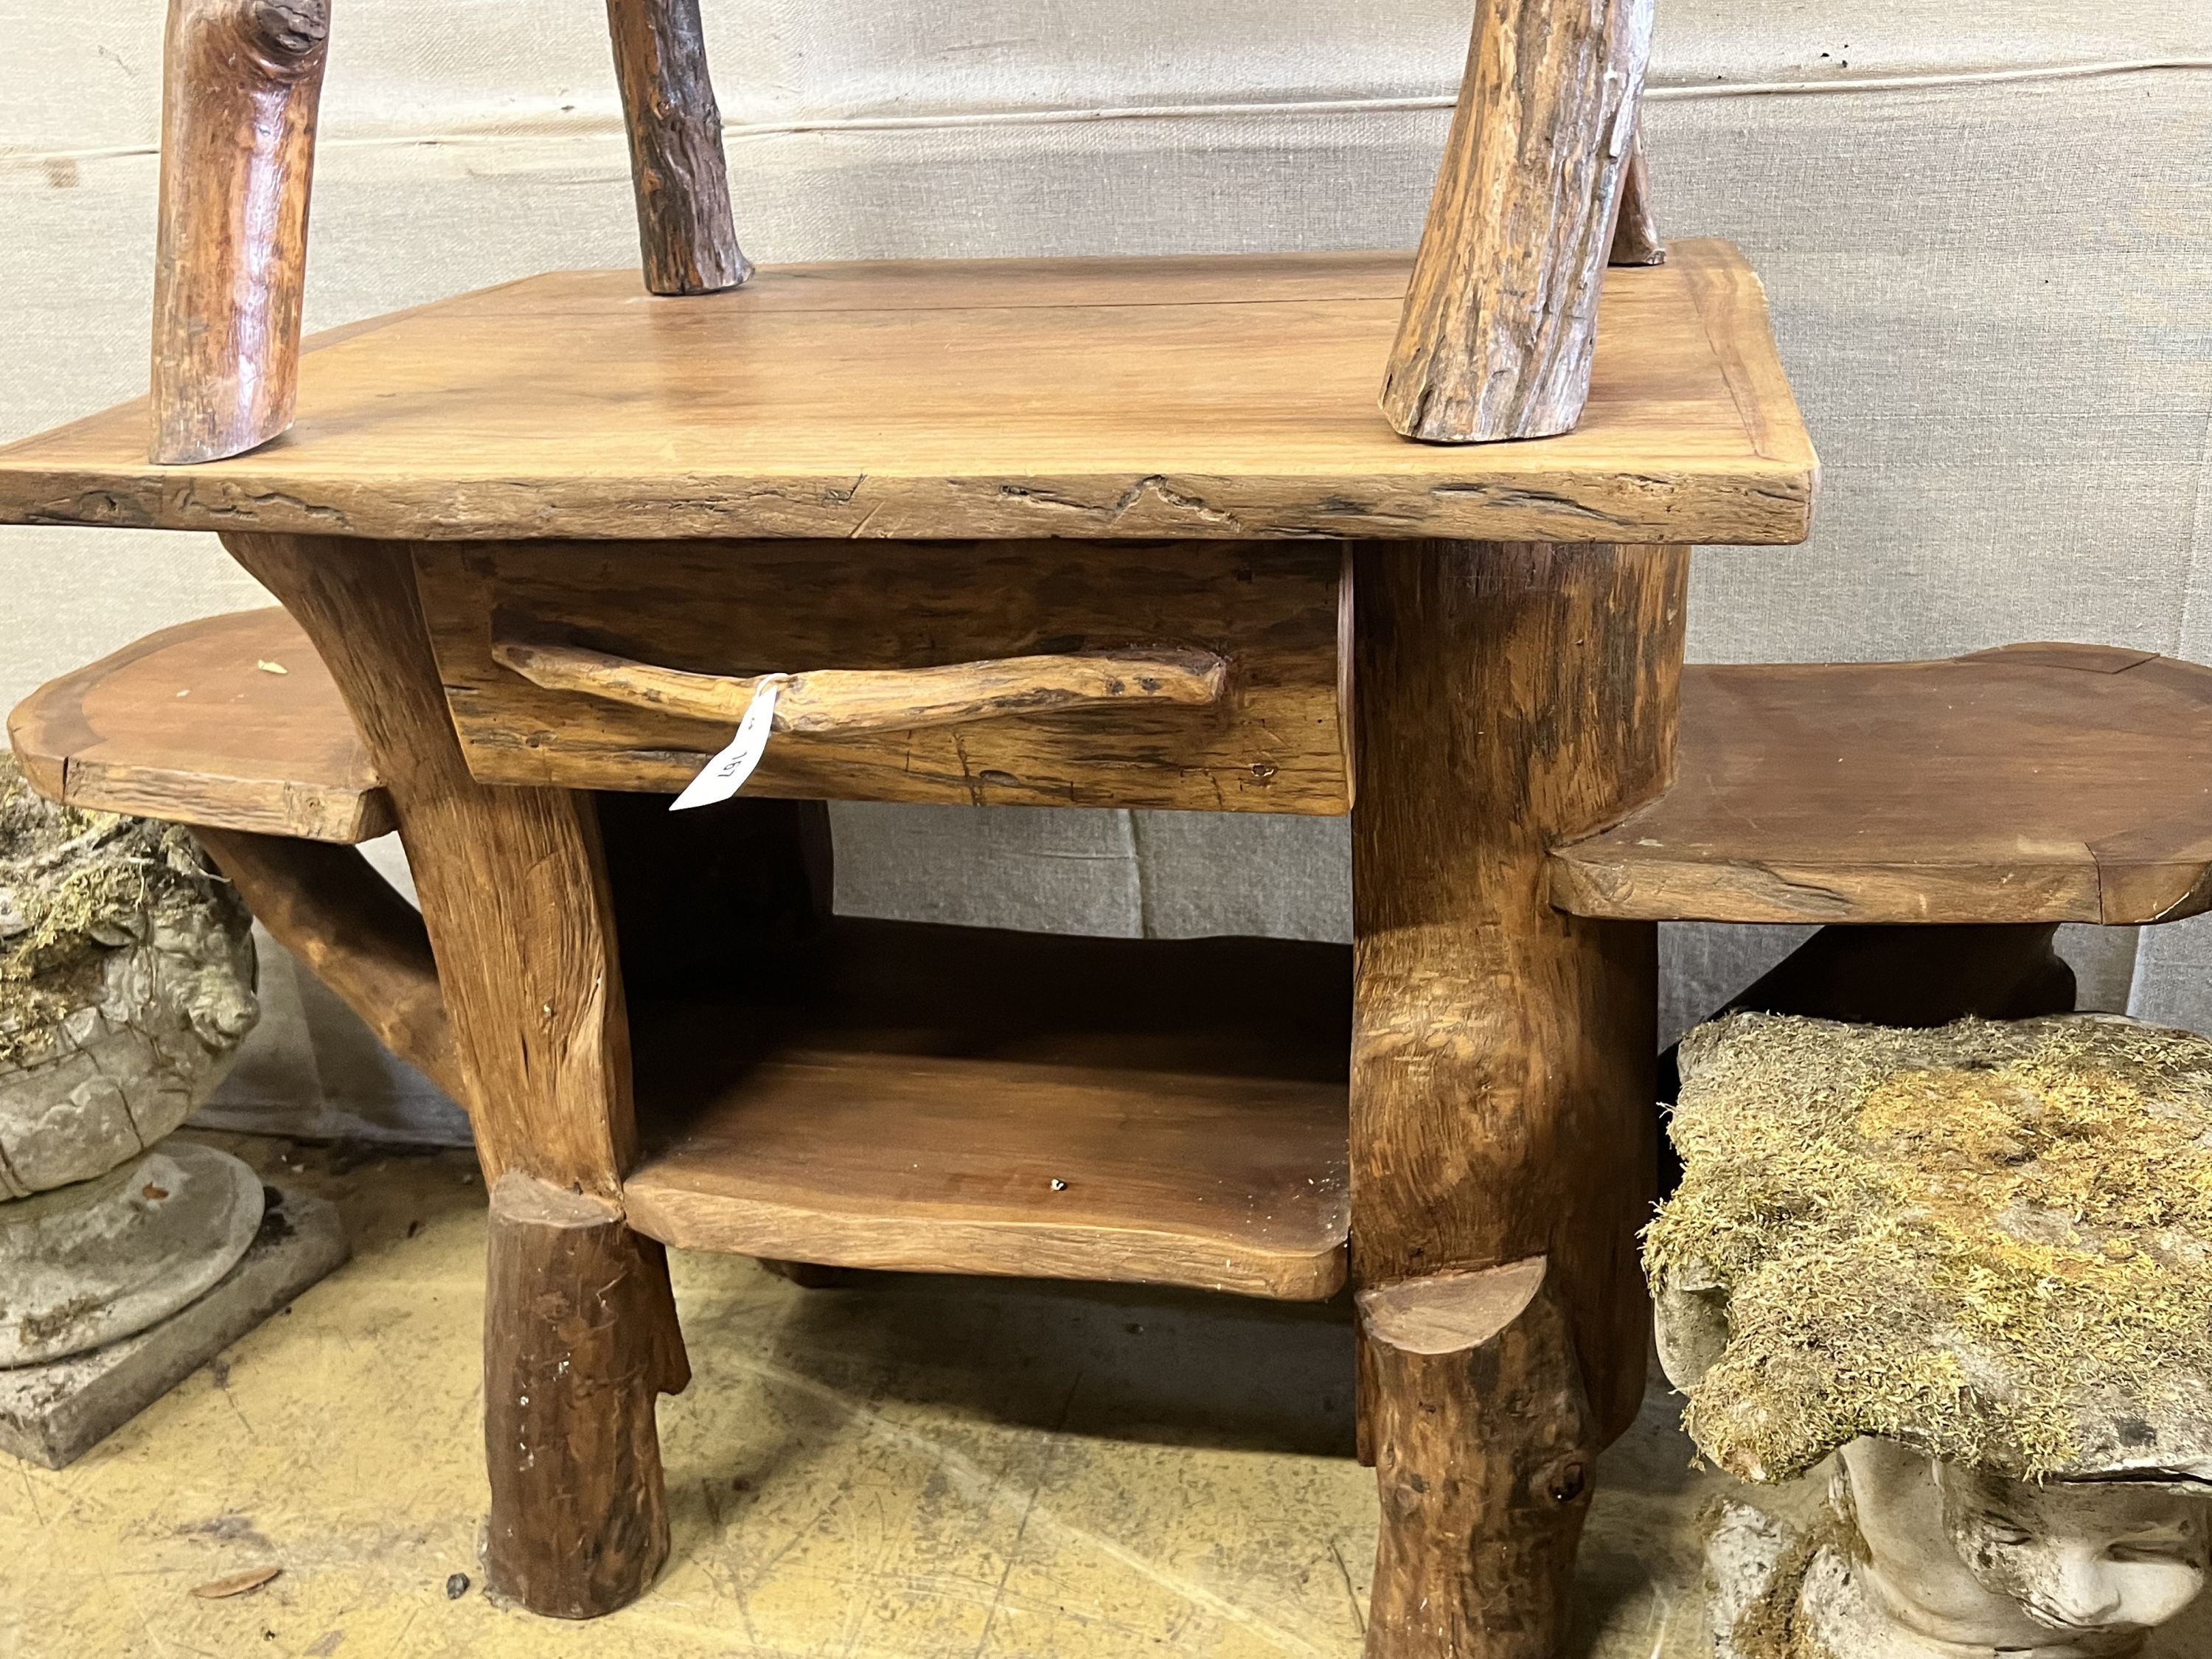 A rustic fruitwood side table and chair, table width 148cm depth 62cm height 81cm